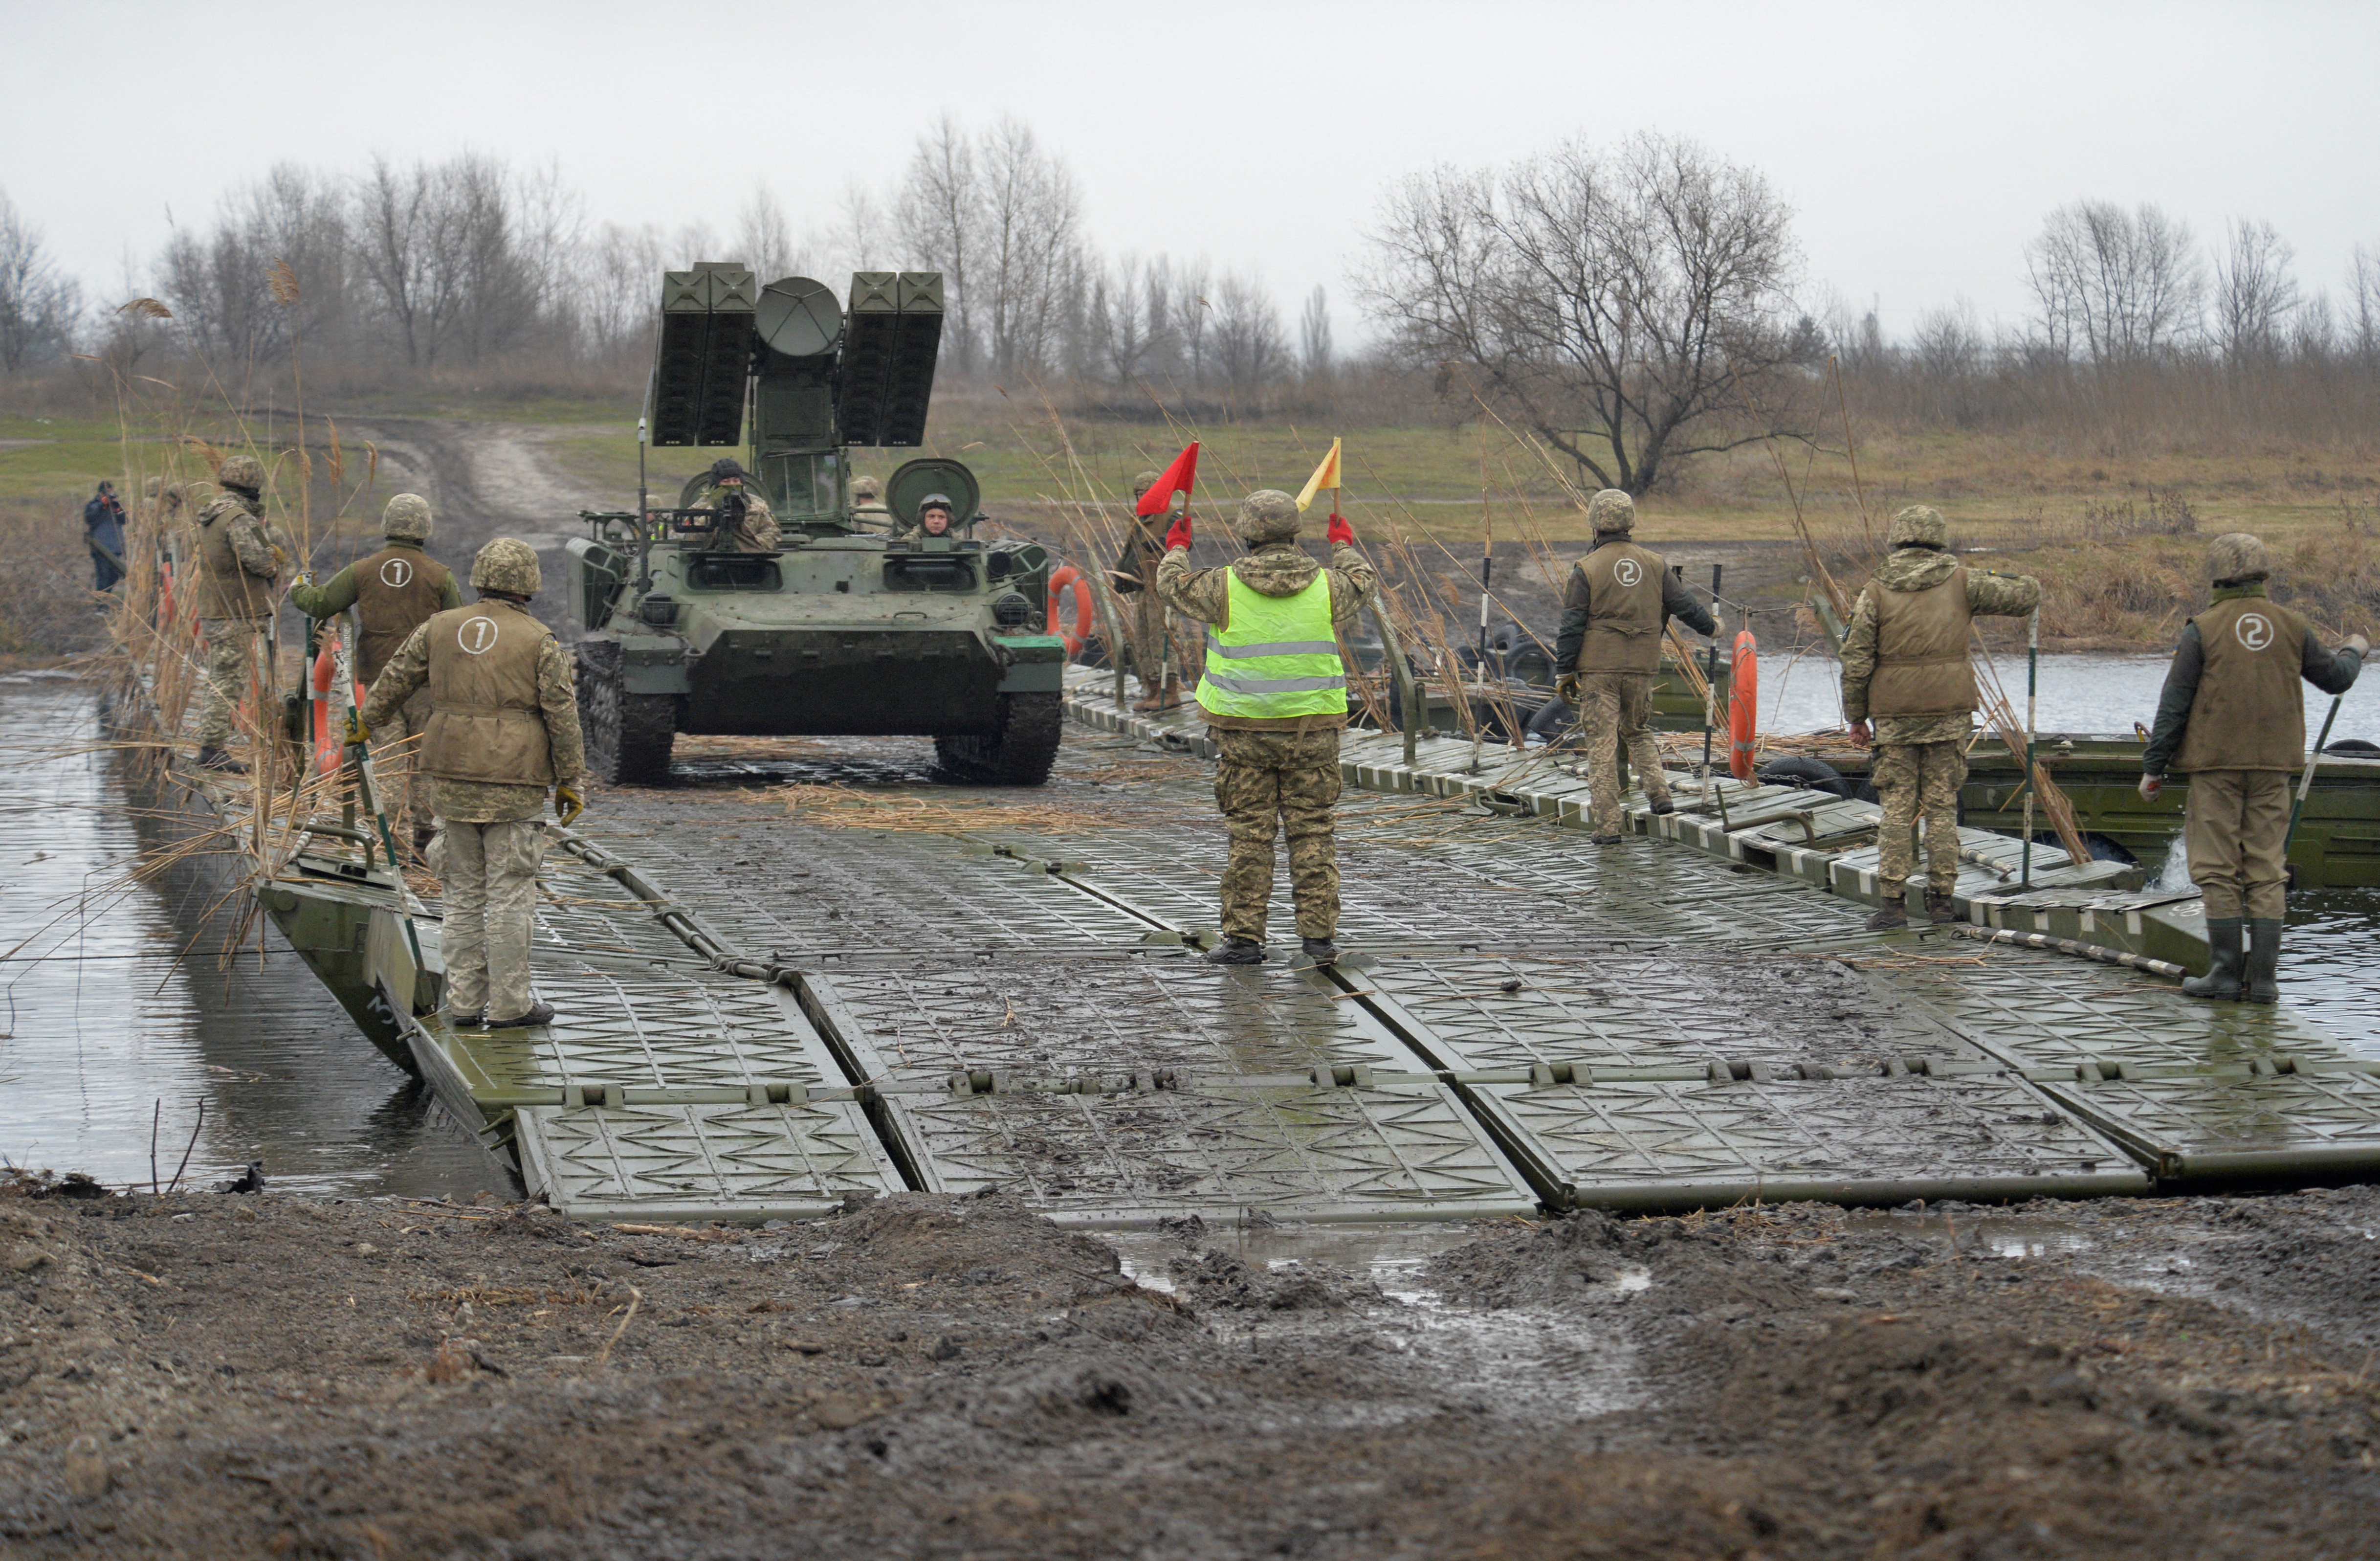 Service members of the Ukrainian armed forces drive a self-propelled rocket launcher along a pontoon bridge while crossing the Aidar River during military drills near Novoaidar in the Luhansk region, Ukraine, December 14, 2021. REUTERS/Oleksandr Klymenko